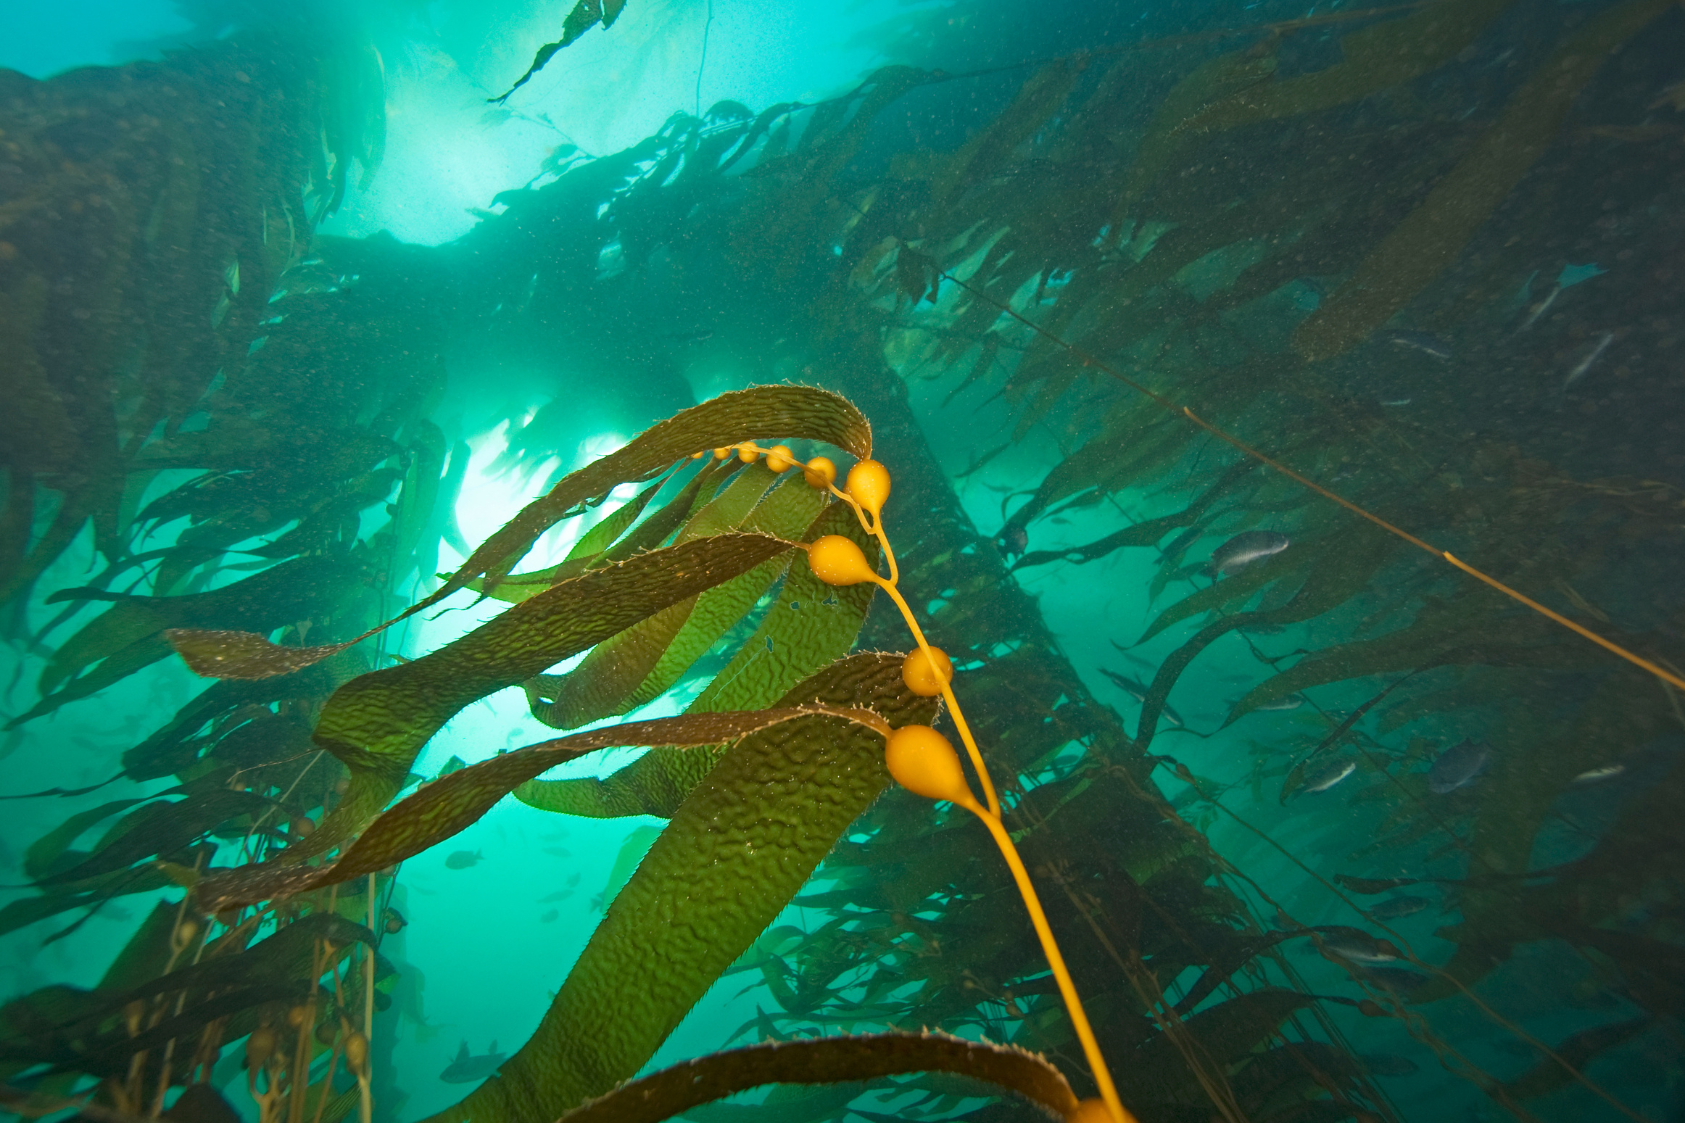 Image of a kelp forest